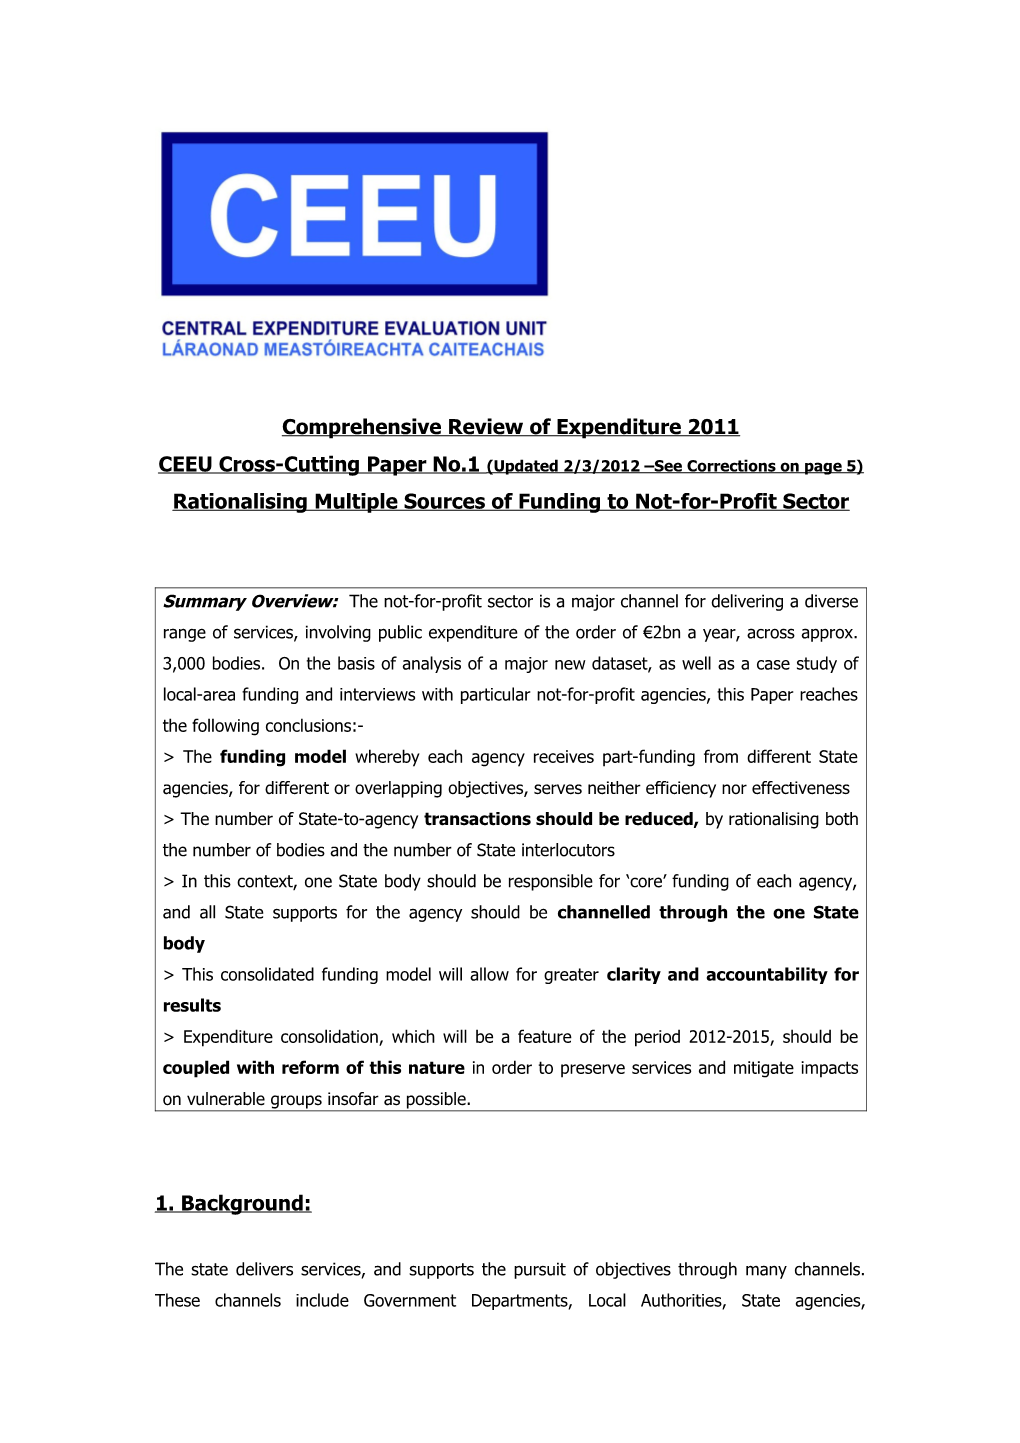 CEEU Cross-Cutting Paper No.1(Updated 2/3/2012 See Corrections on Page 5)